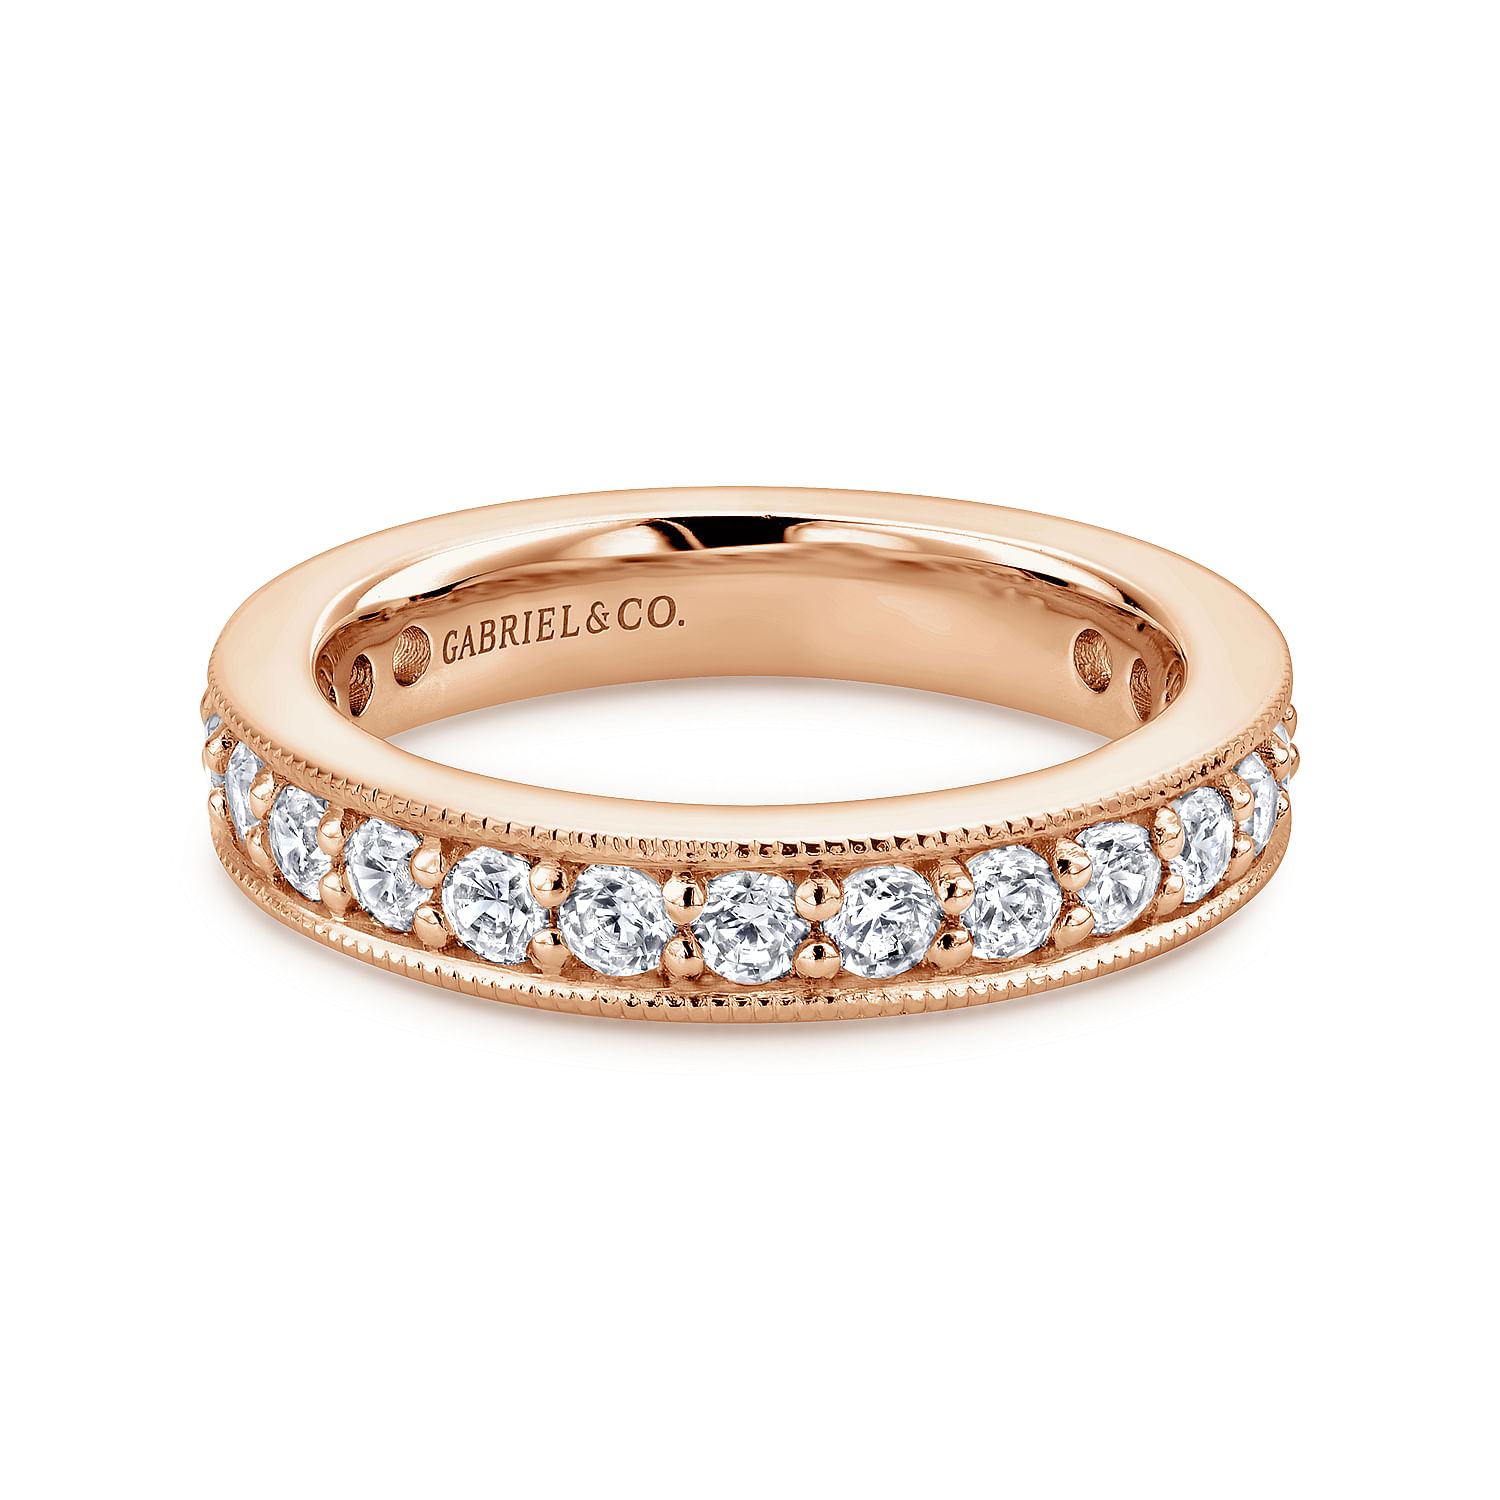 Calabria - 14K Rose Gold Channel Prong Set Diamond Eternity Band